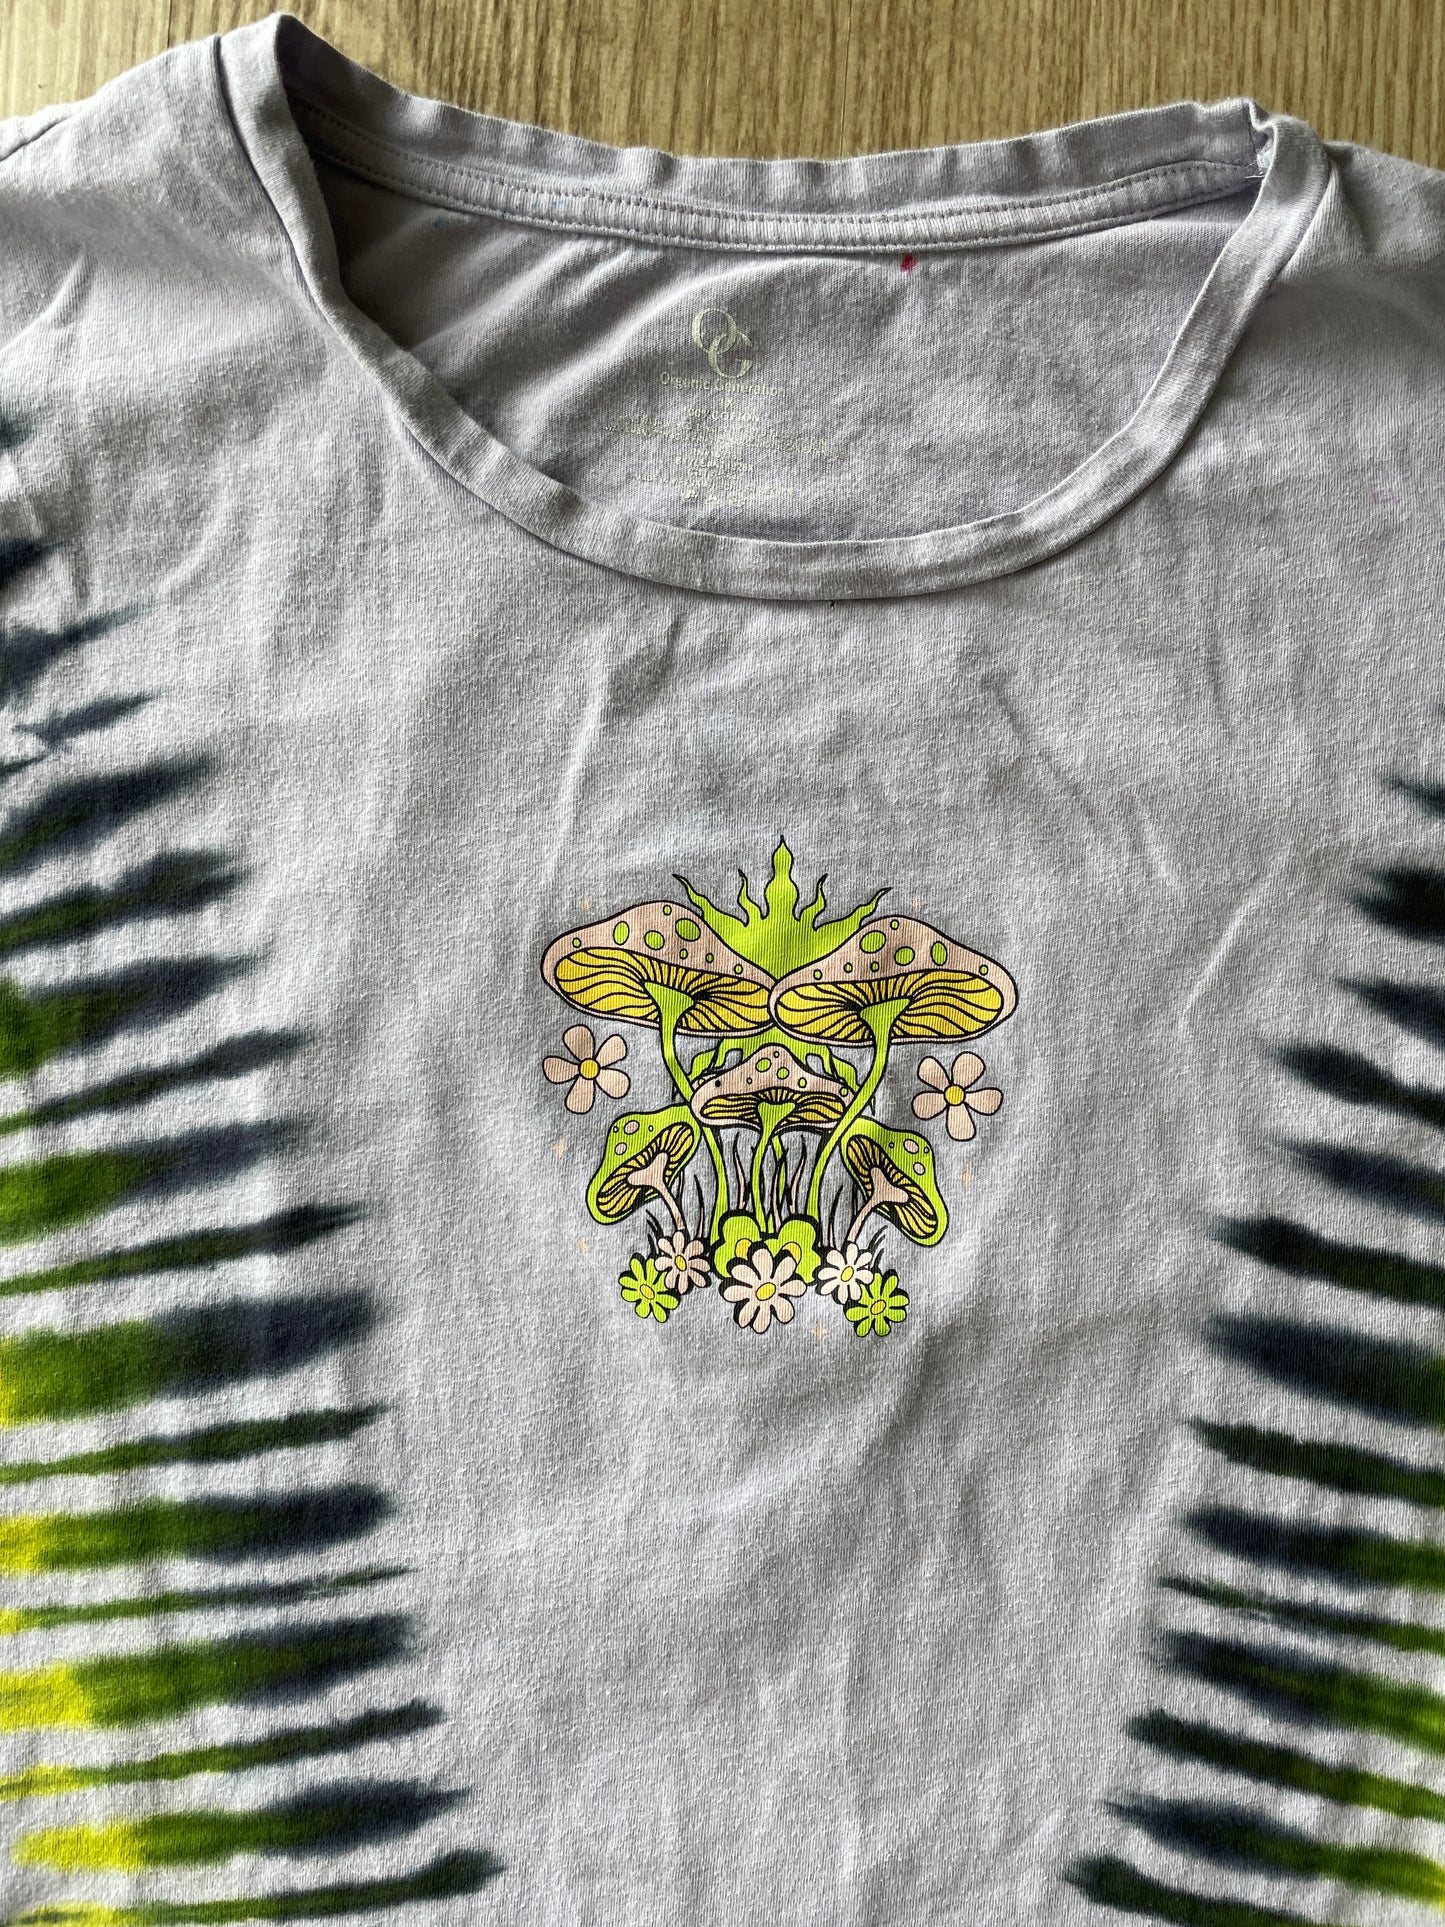 XL Women’s Serenity Planet Mushrooms Tie Dye Short Sleeve T-Shirt | One-Of-a-Kind Upcycled Purple, Green, and Black Pleated Top